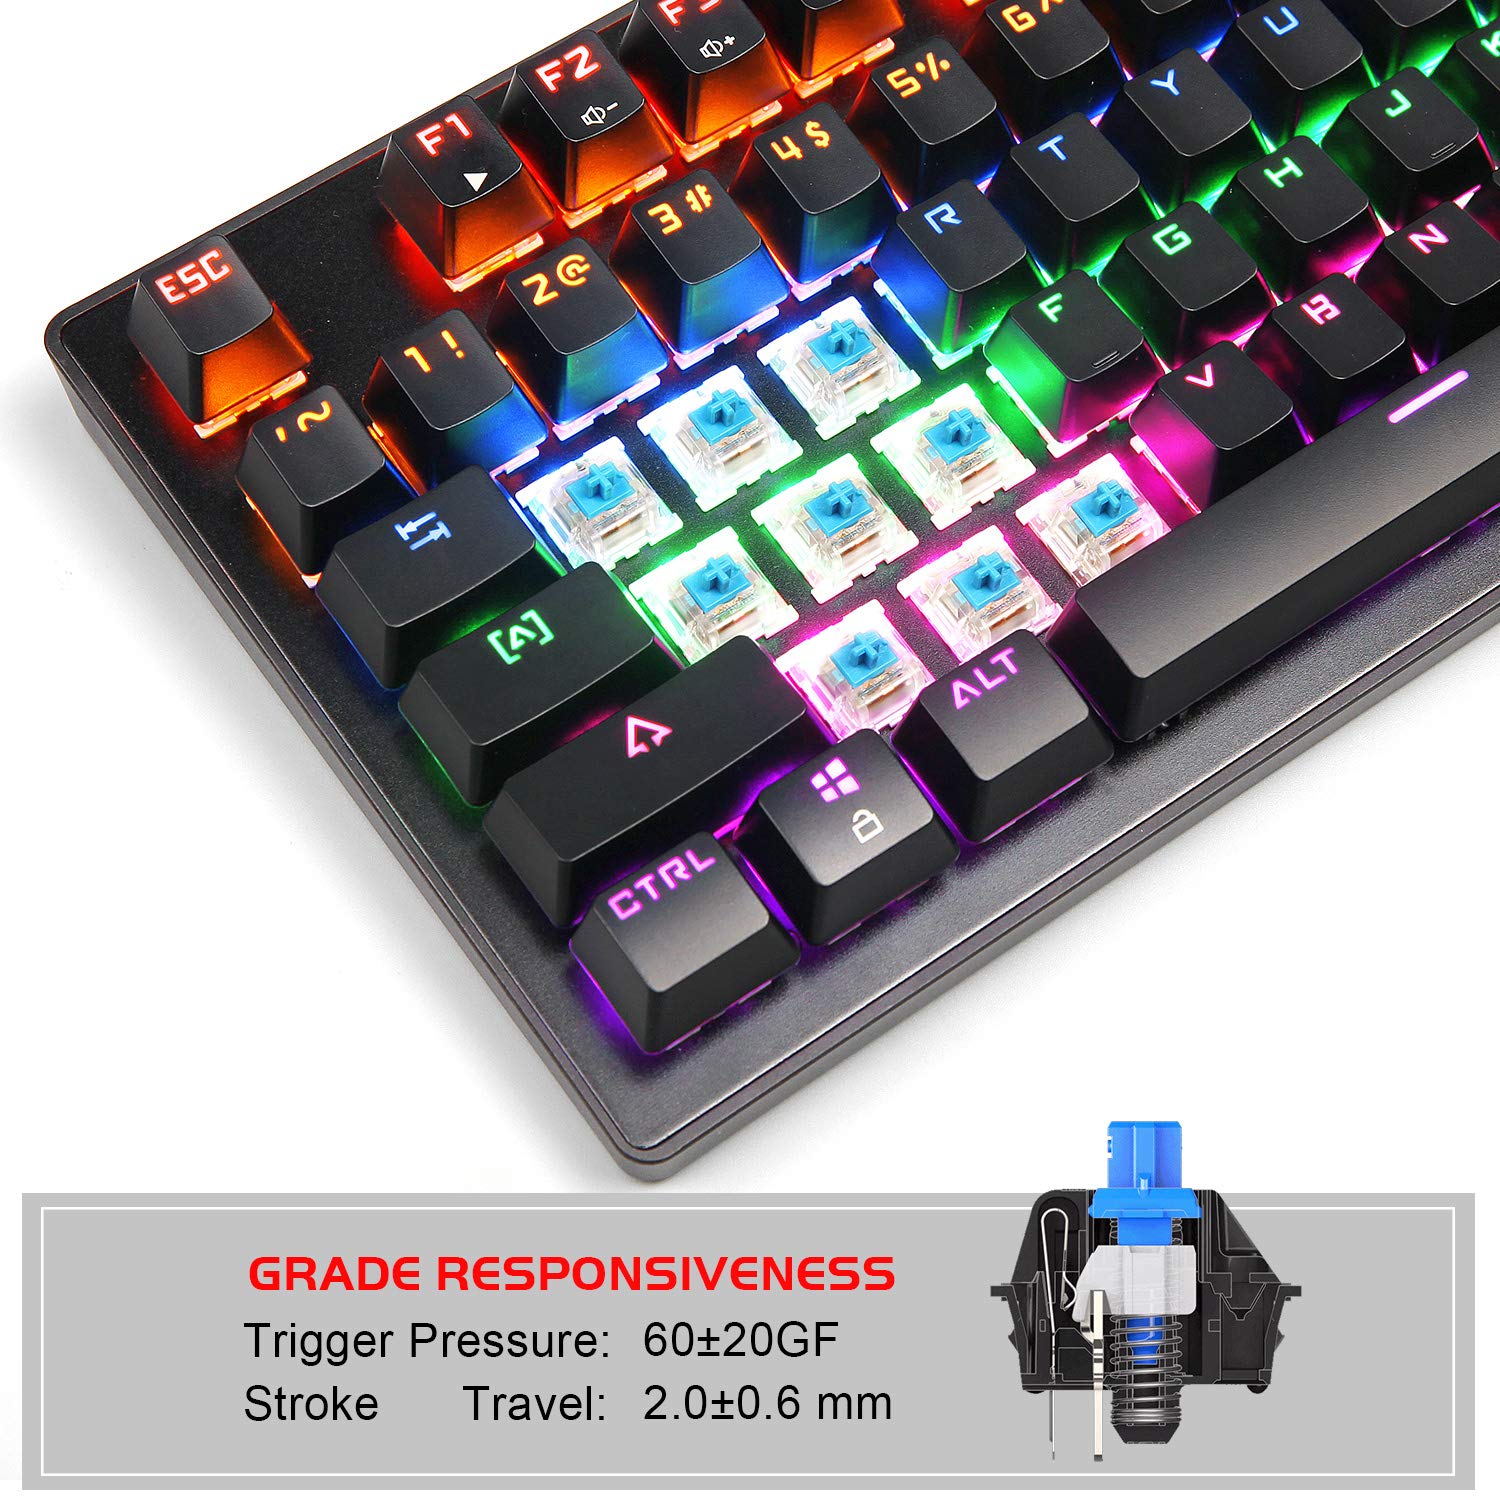 MageGee Mechanical Gaming Keyboard 87 Keys with RGB LED Backlit - Wired USB Computer Keyboard with Blue Switches, 100% Anti-Ghosting, Metal Construction, Water Resistant for Windows PC Laptop